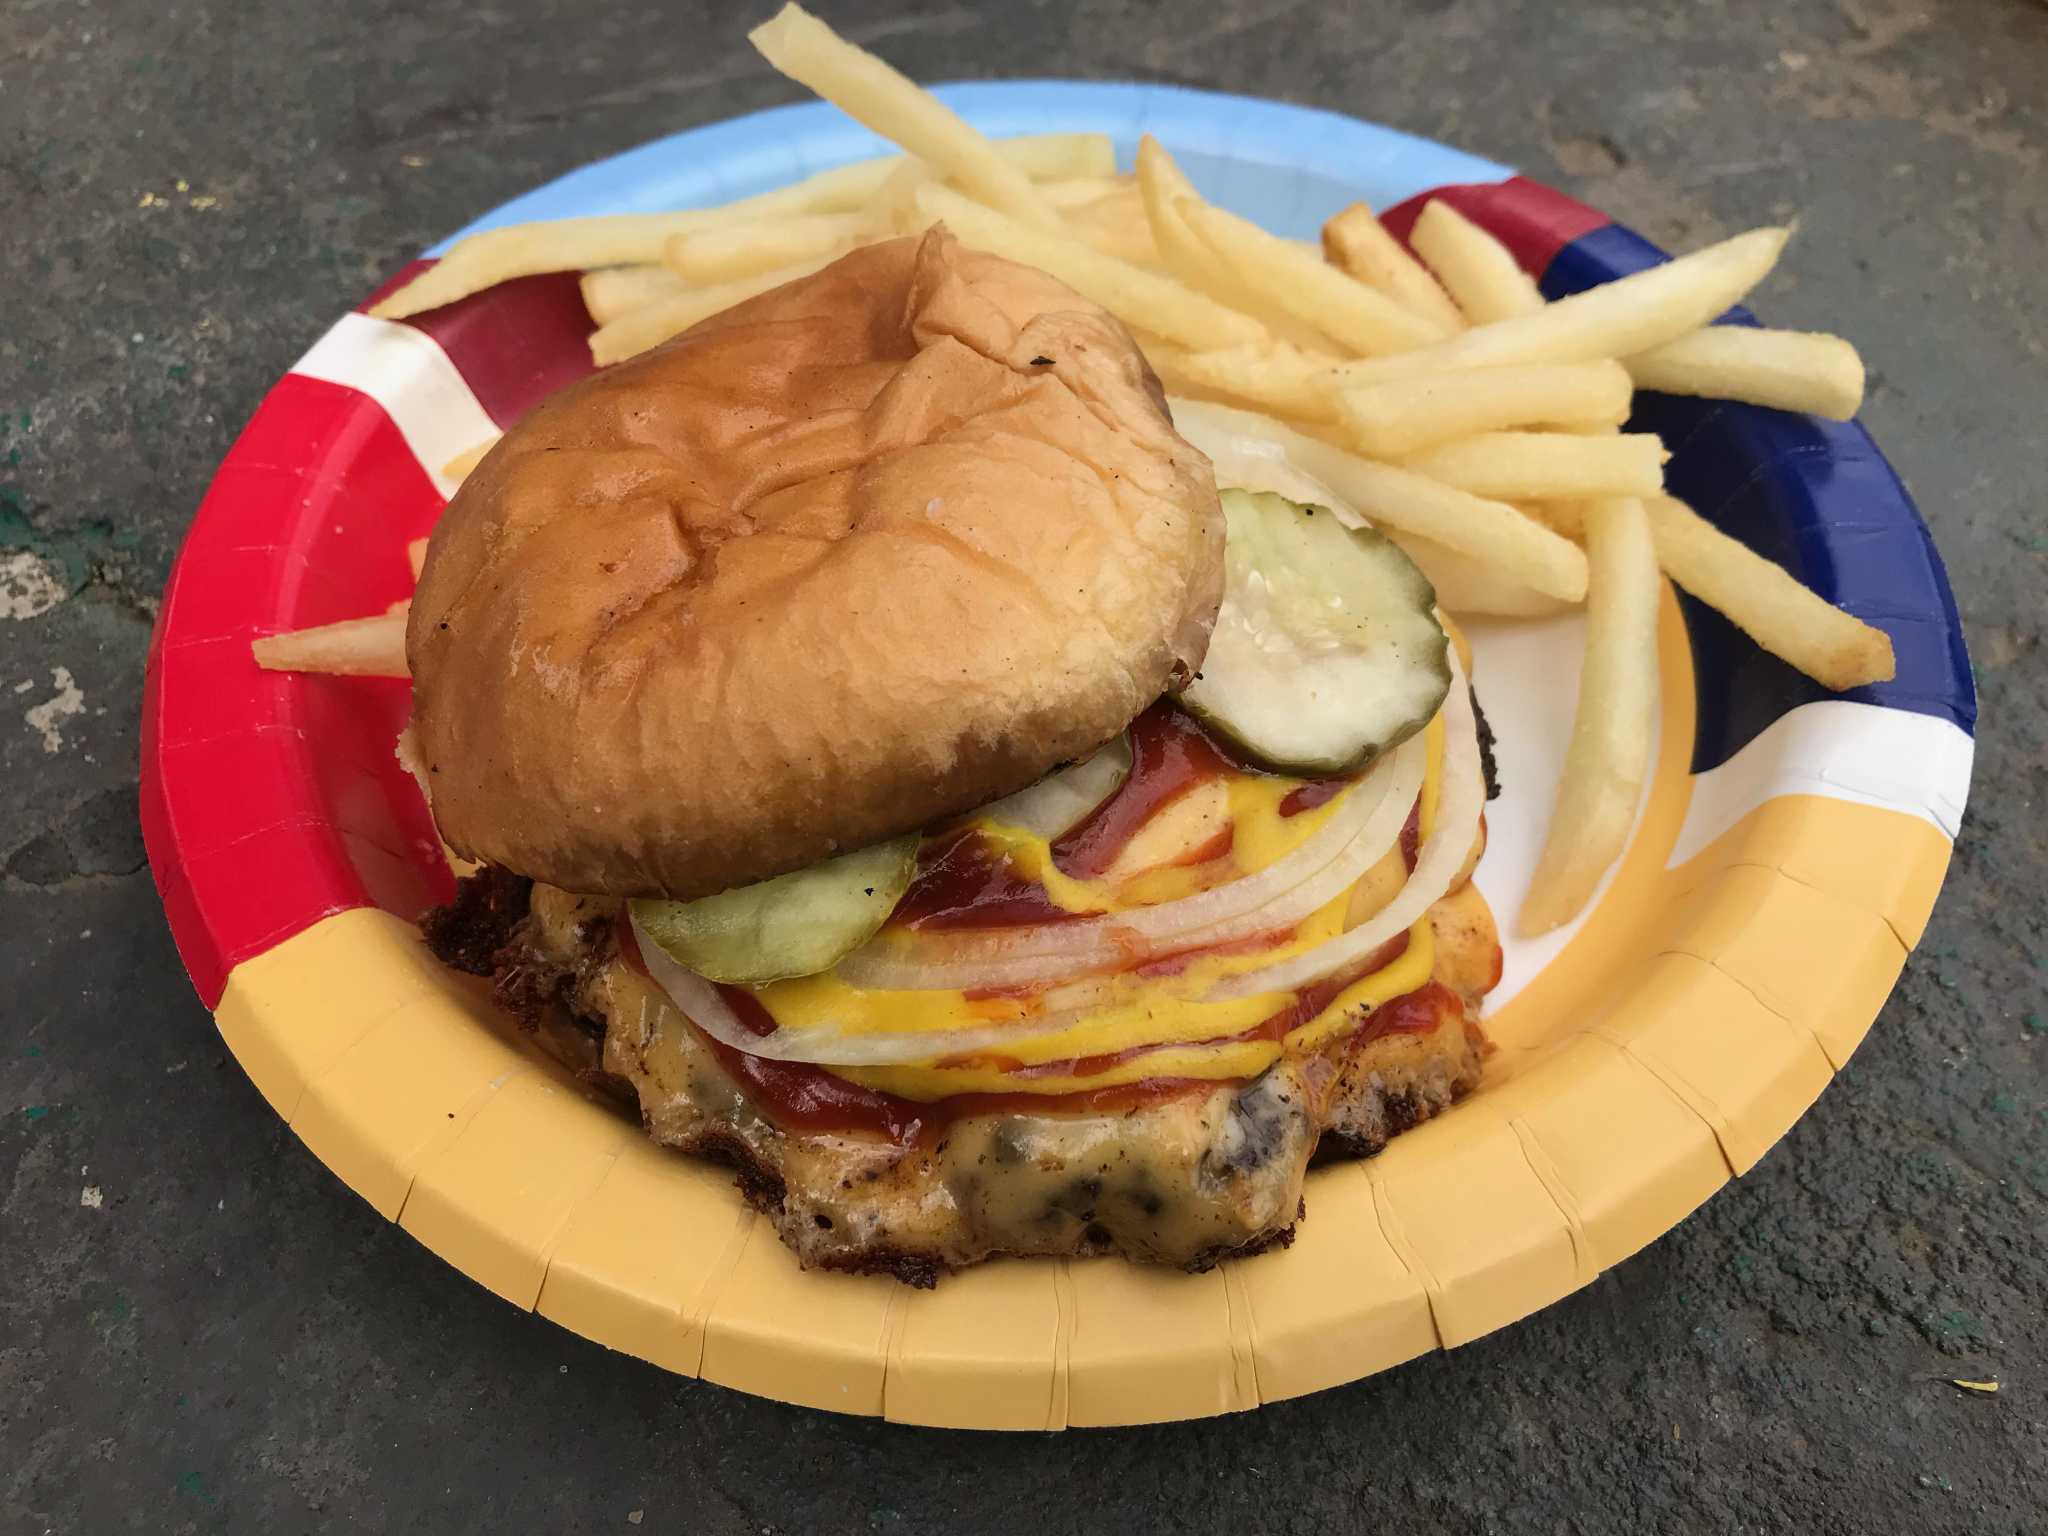 One of San Antonio’s best burgers comes from the Rrated Pumpers popup